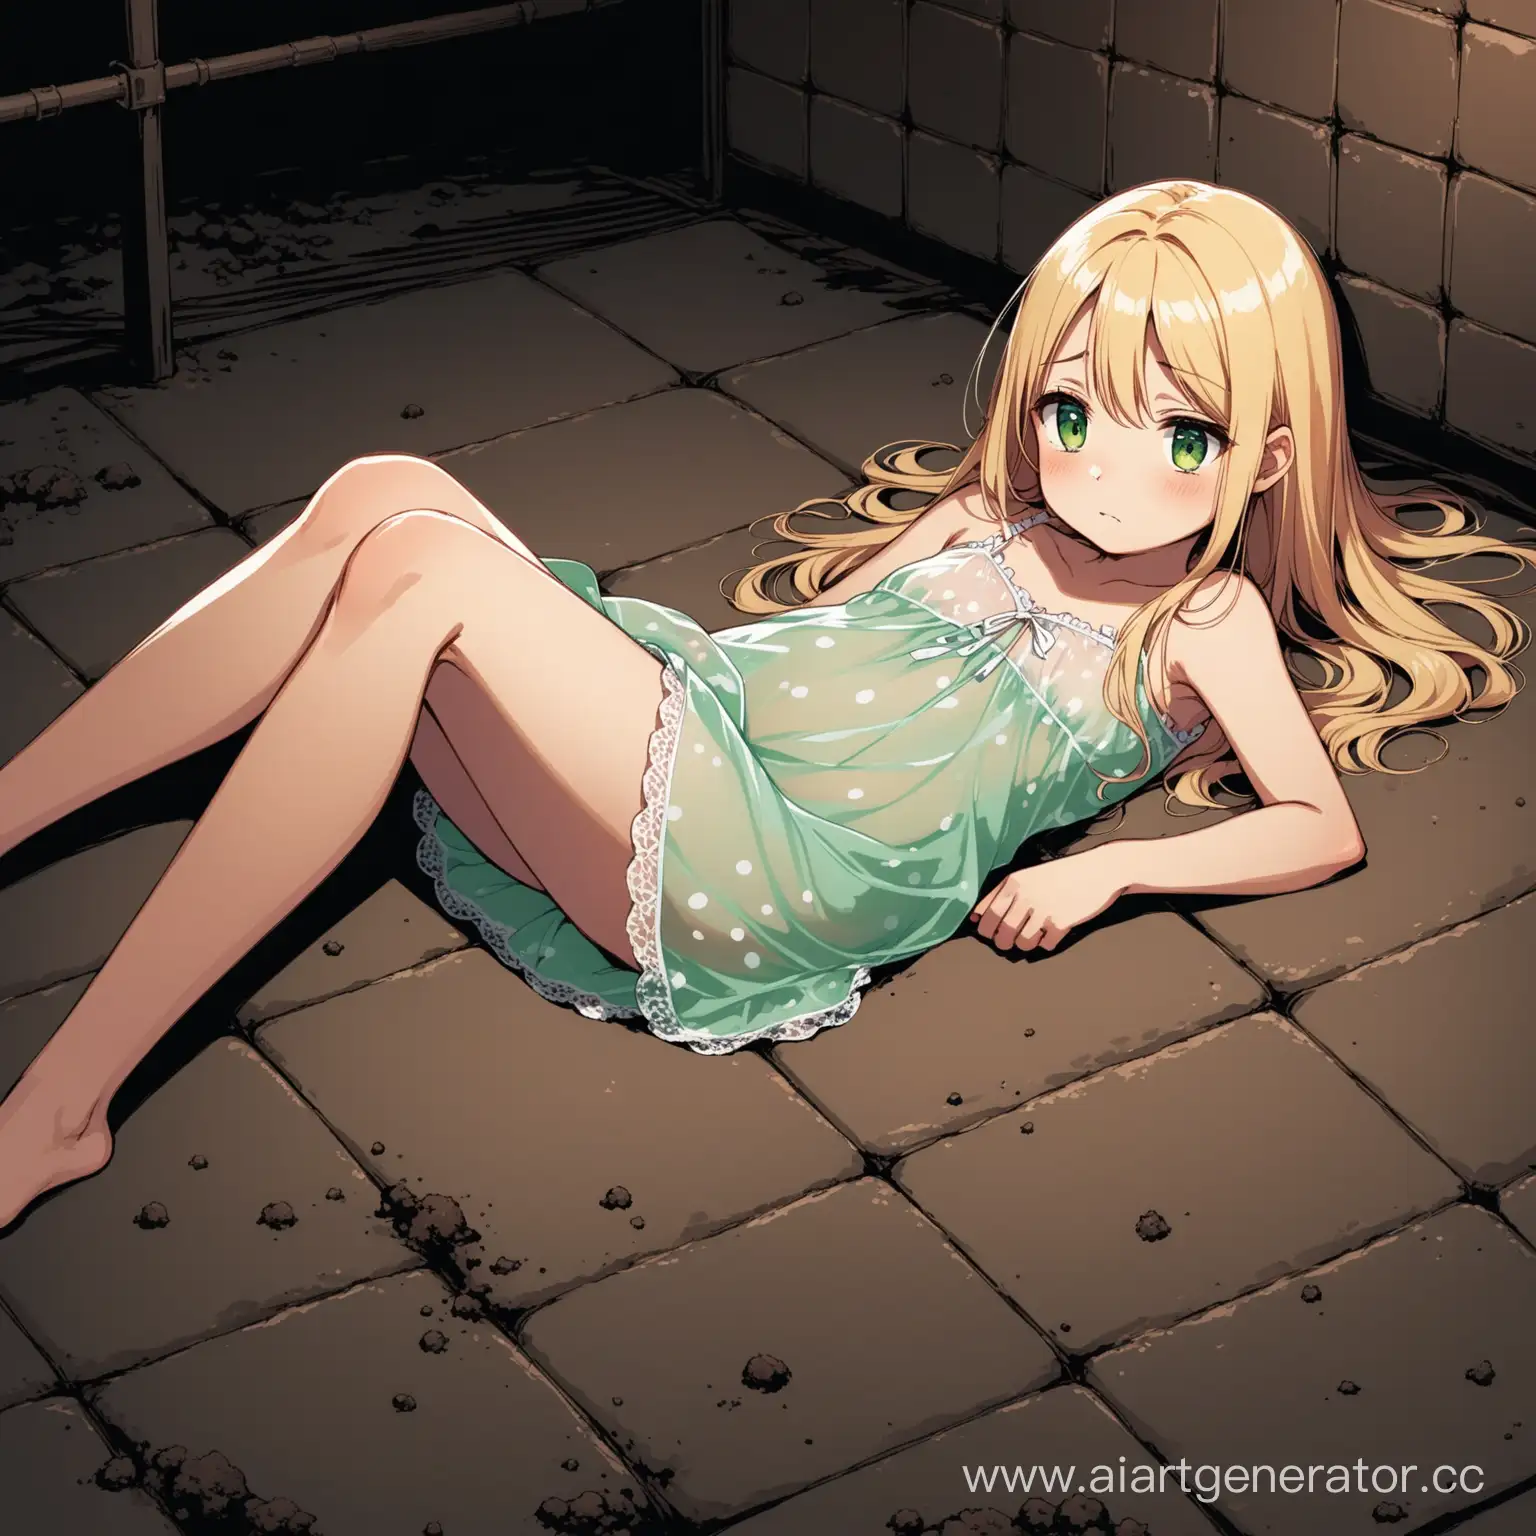 Lonely-Blonde-Girl-in-SemiTransparent-Nightgown-Lying-on-Basement-Mattress